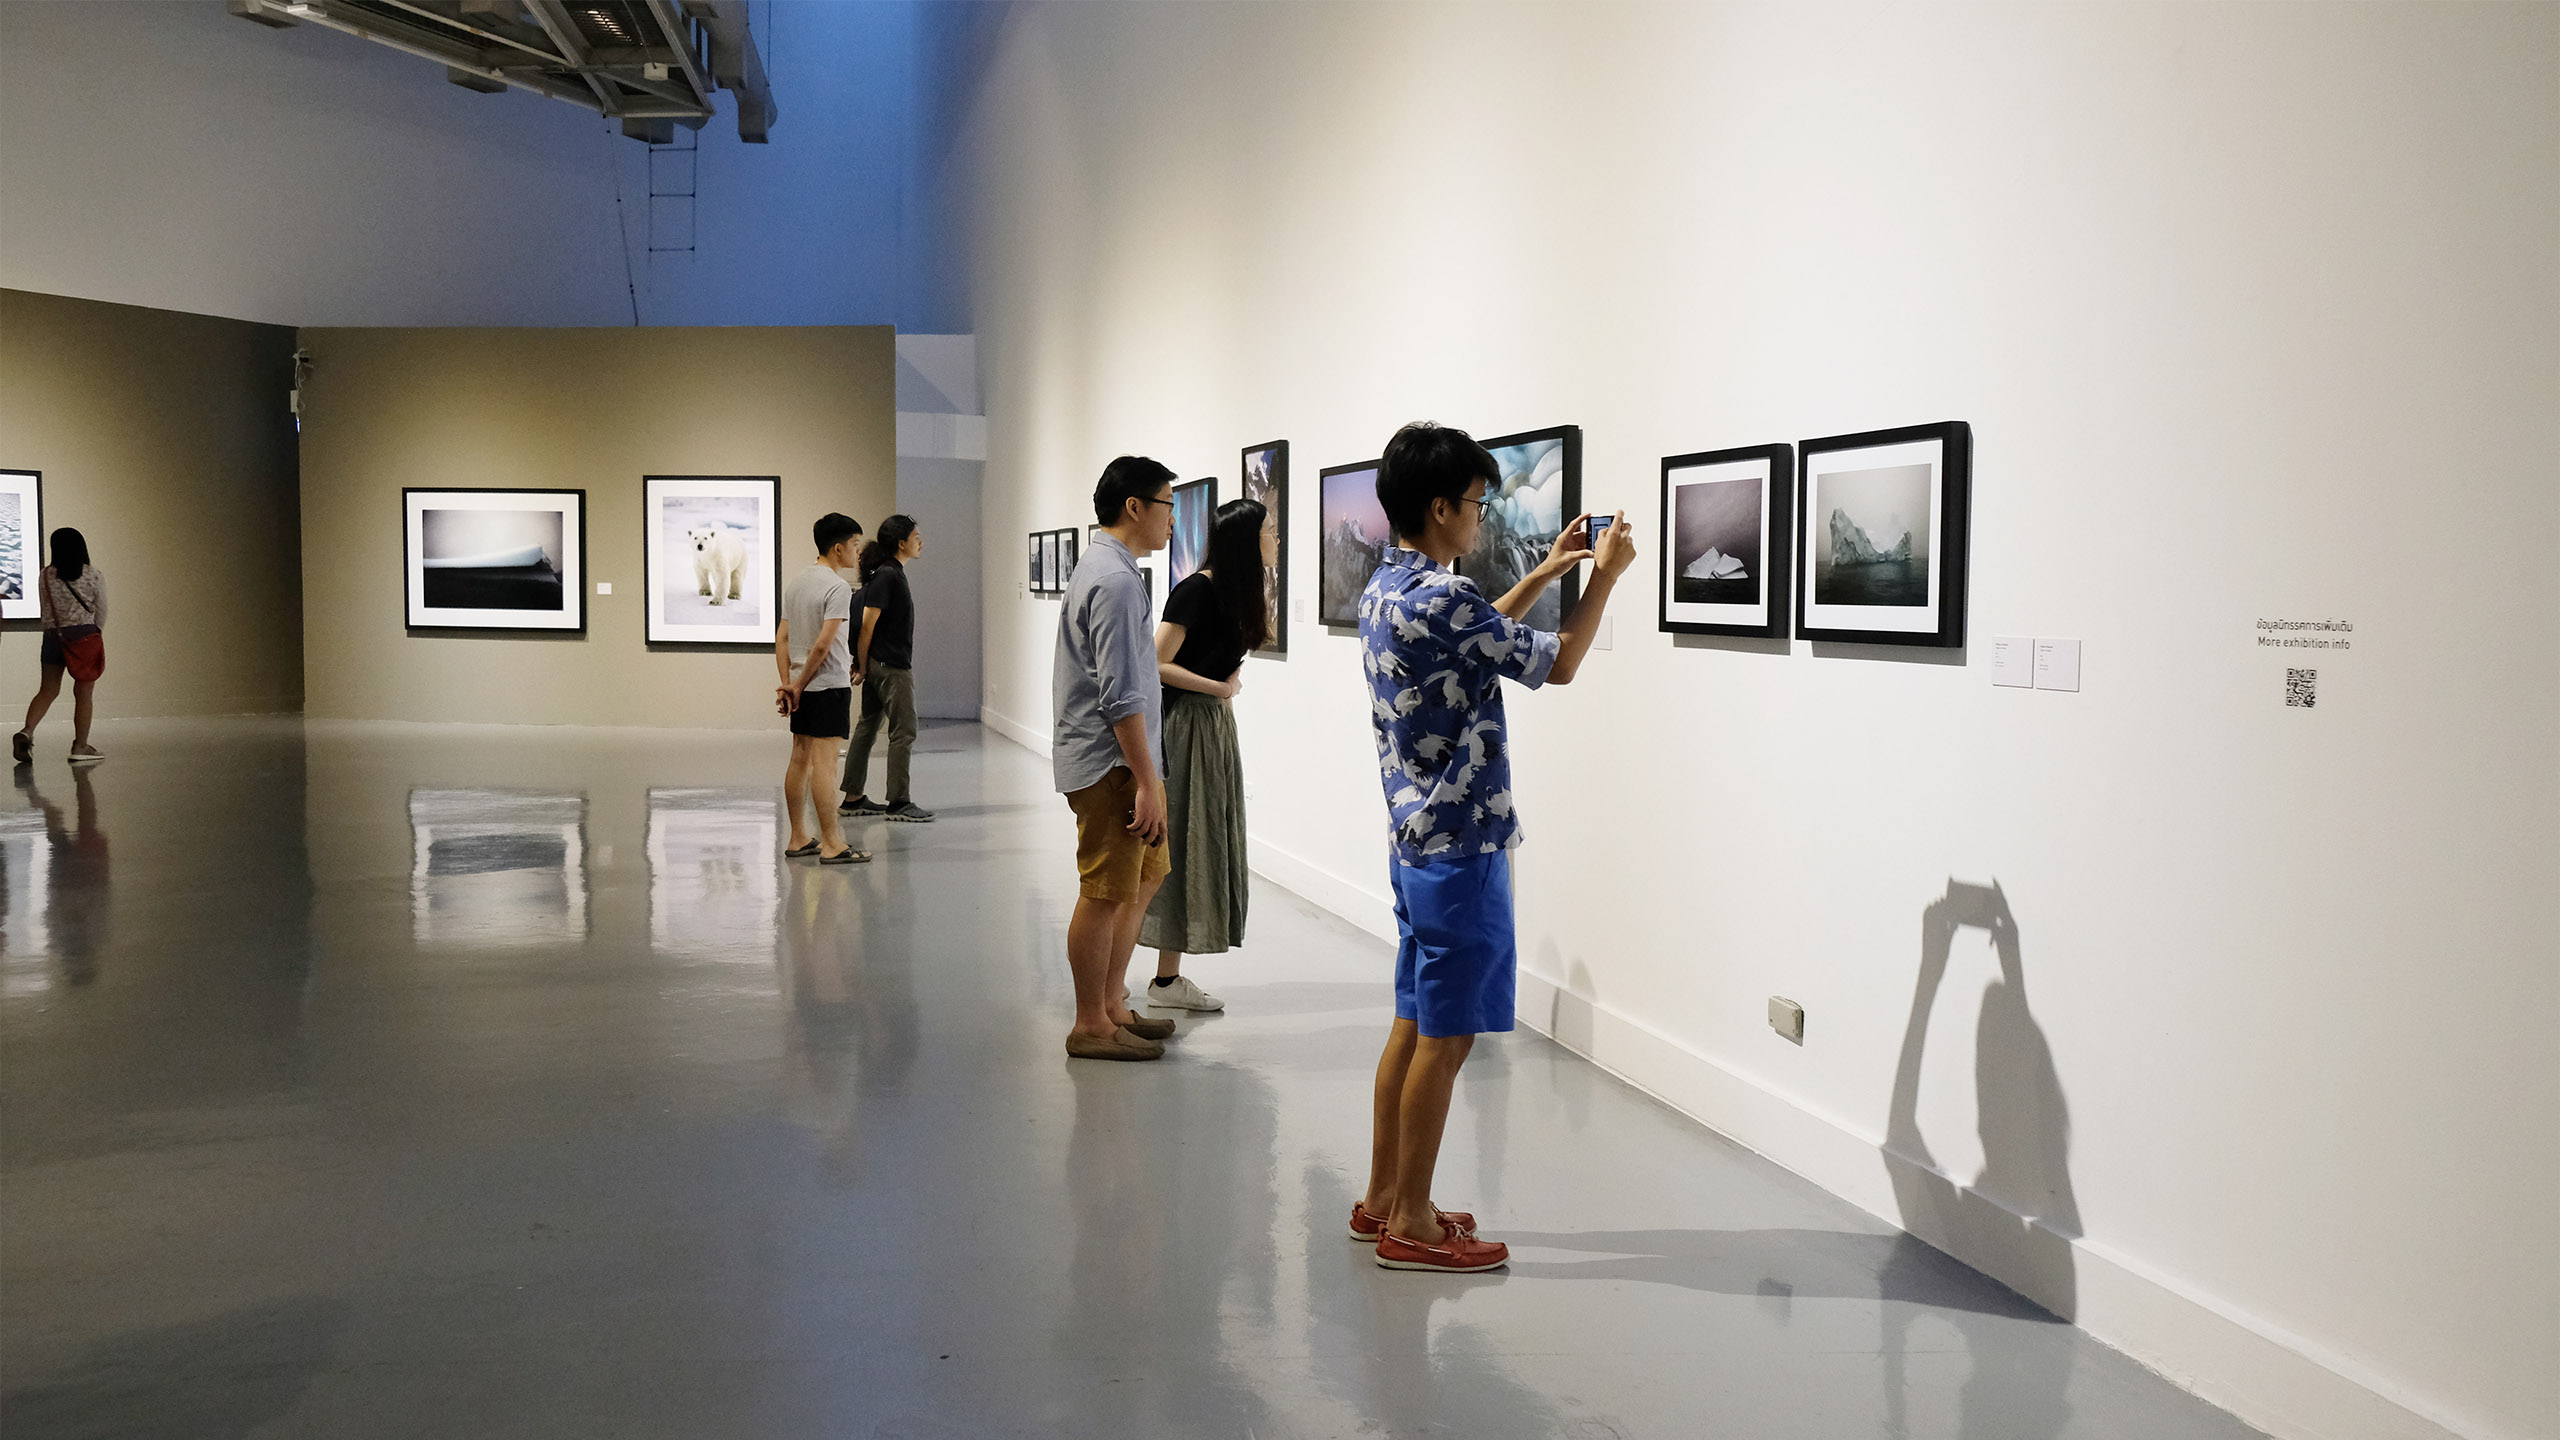 Exhibition Beyond the Air We Breathe: Addressing causes and effects of climate change | นิทรรศการภาพถ่าย